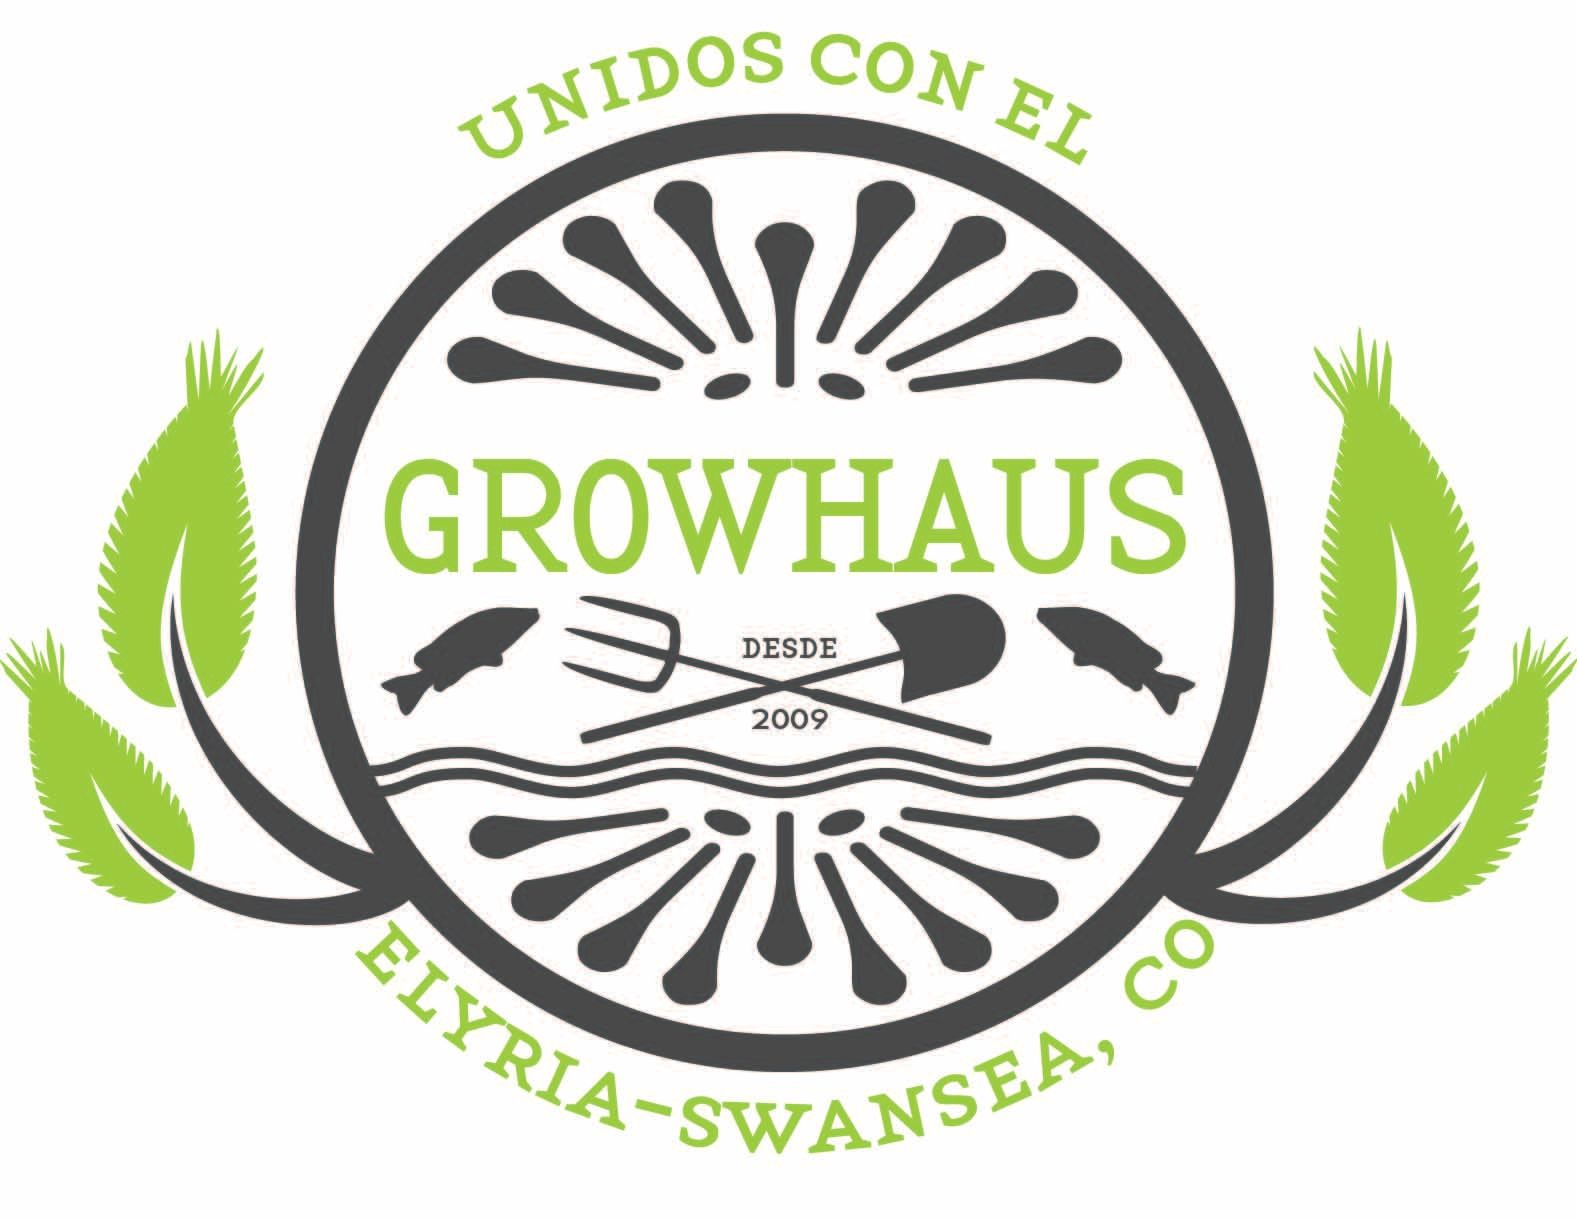 The Growhaus